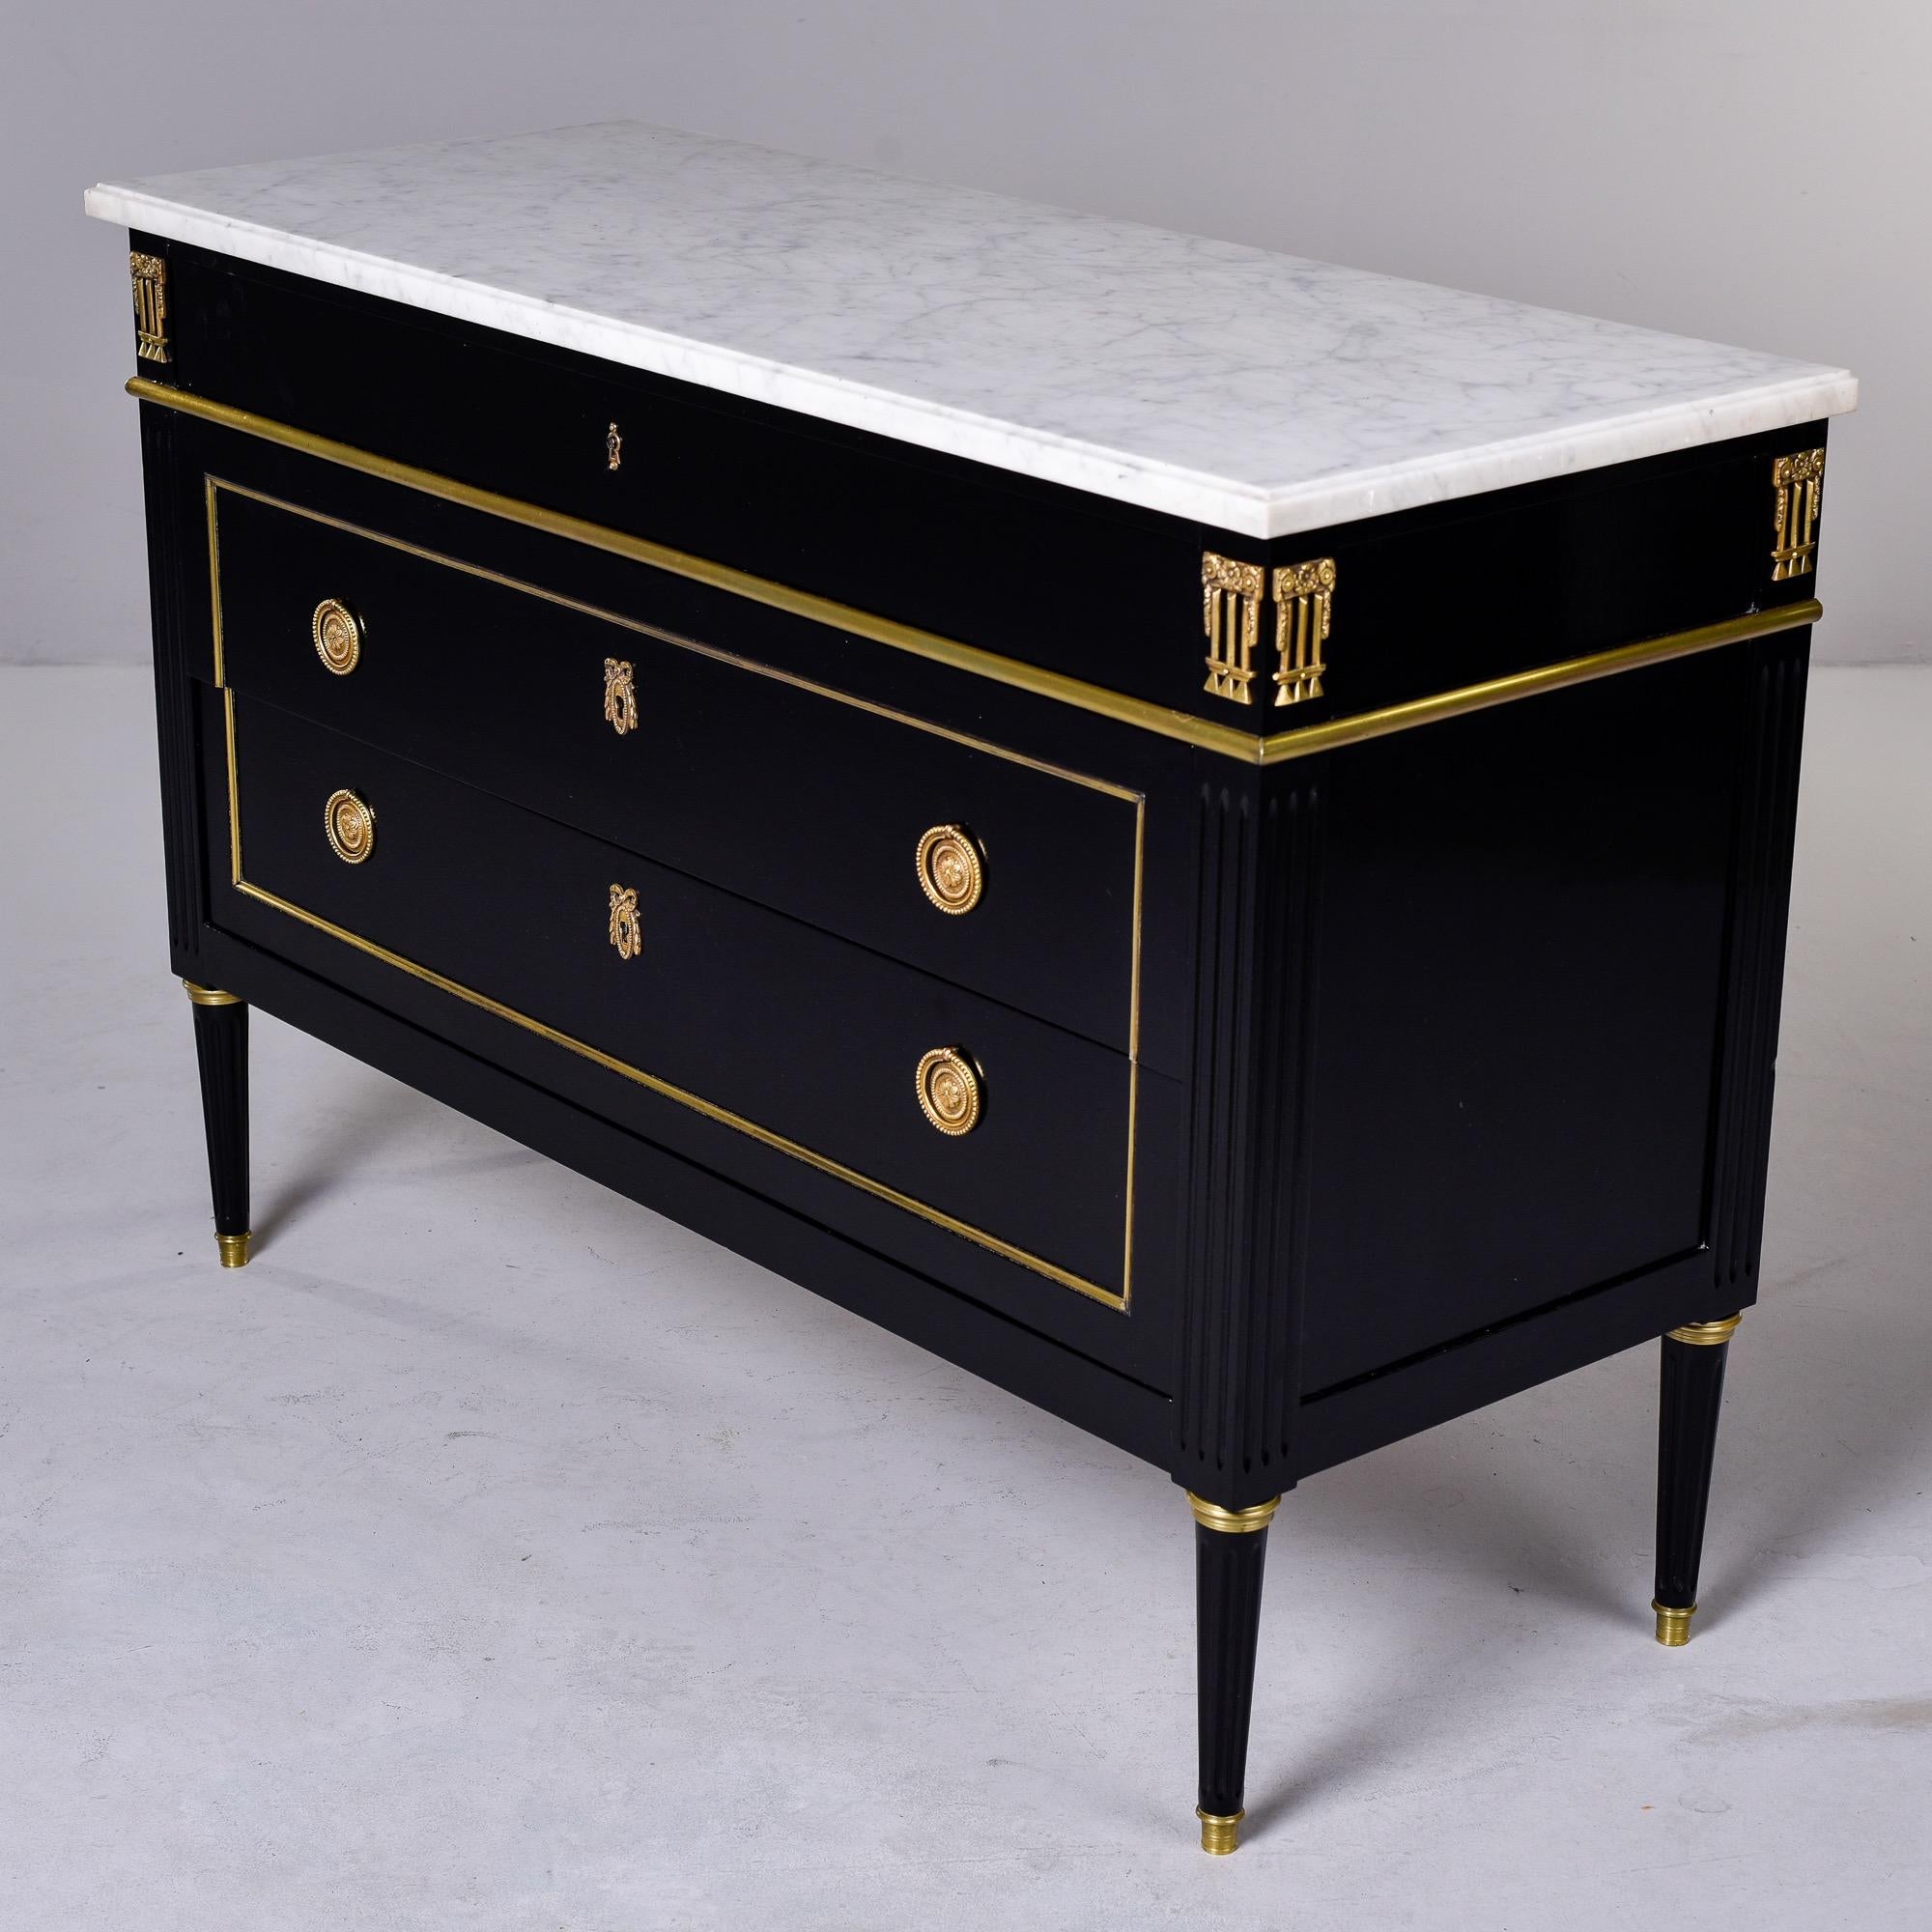 20th Century Ebonised Louis XVI Style Mahogany Commode with White Marble Top